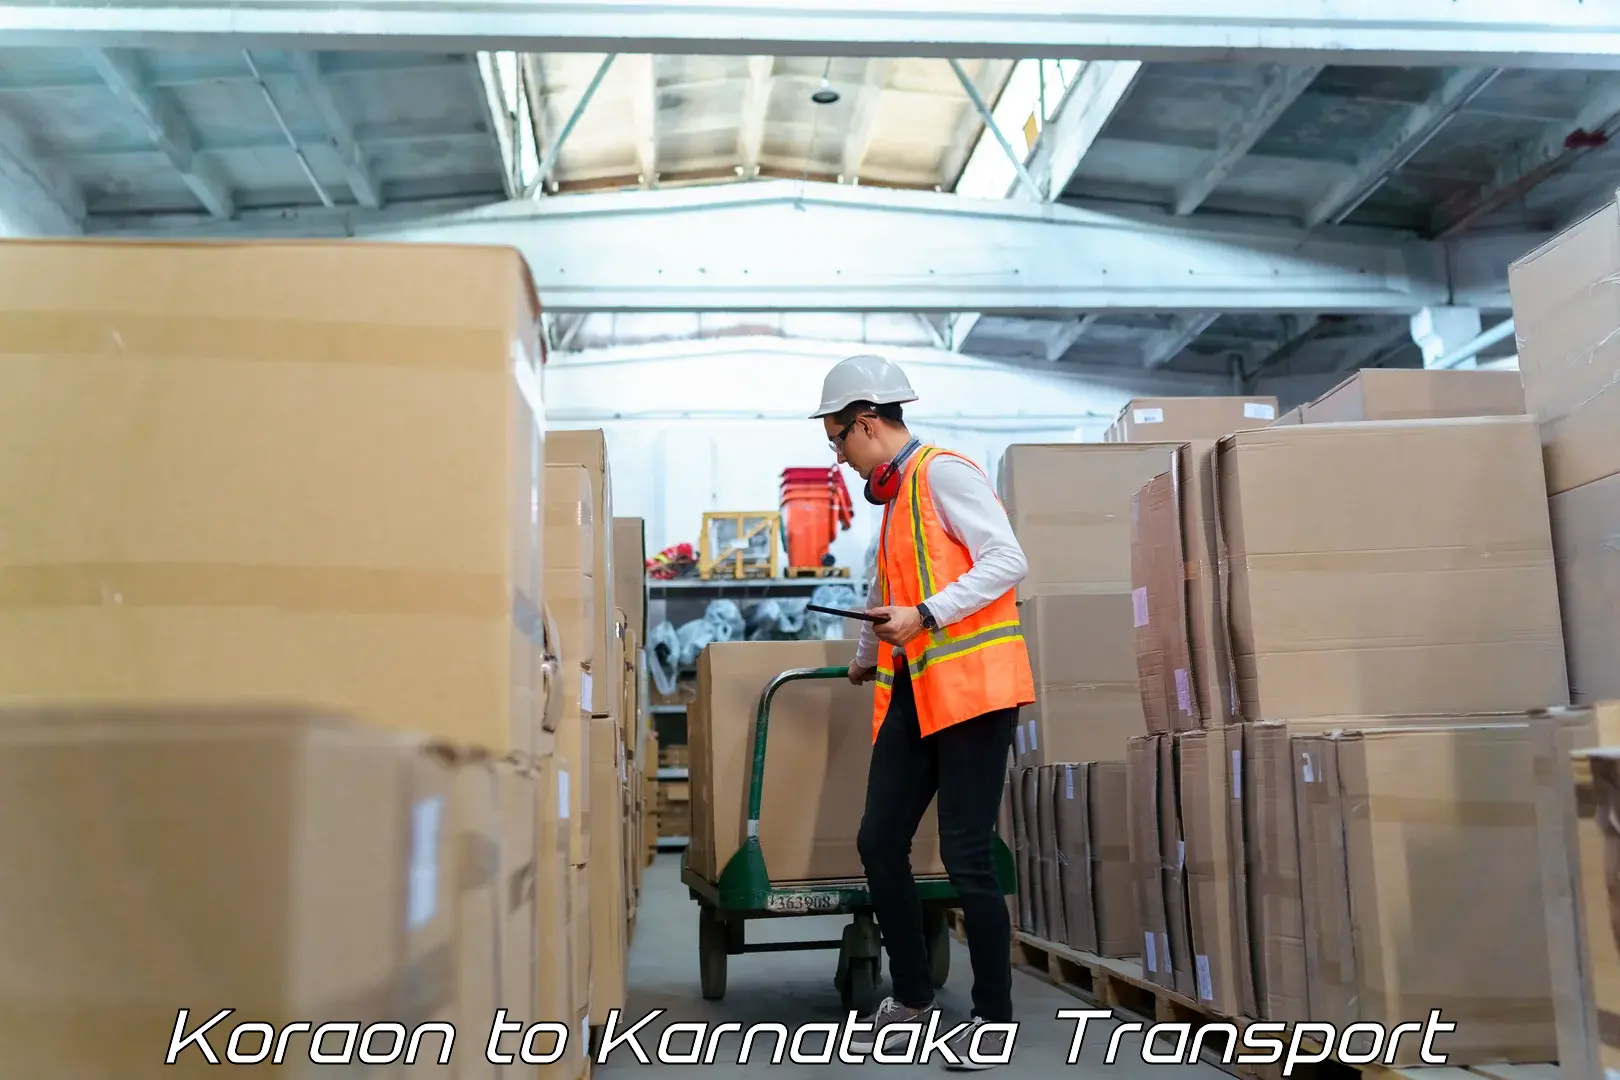 Truck transport companies in India Koraon to Chikmagalur